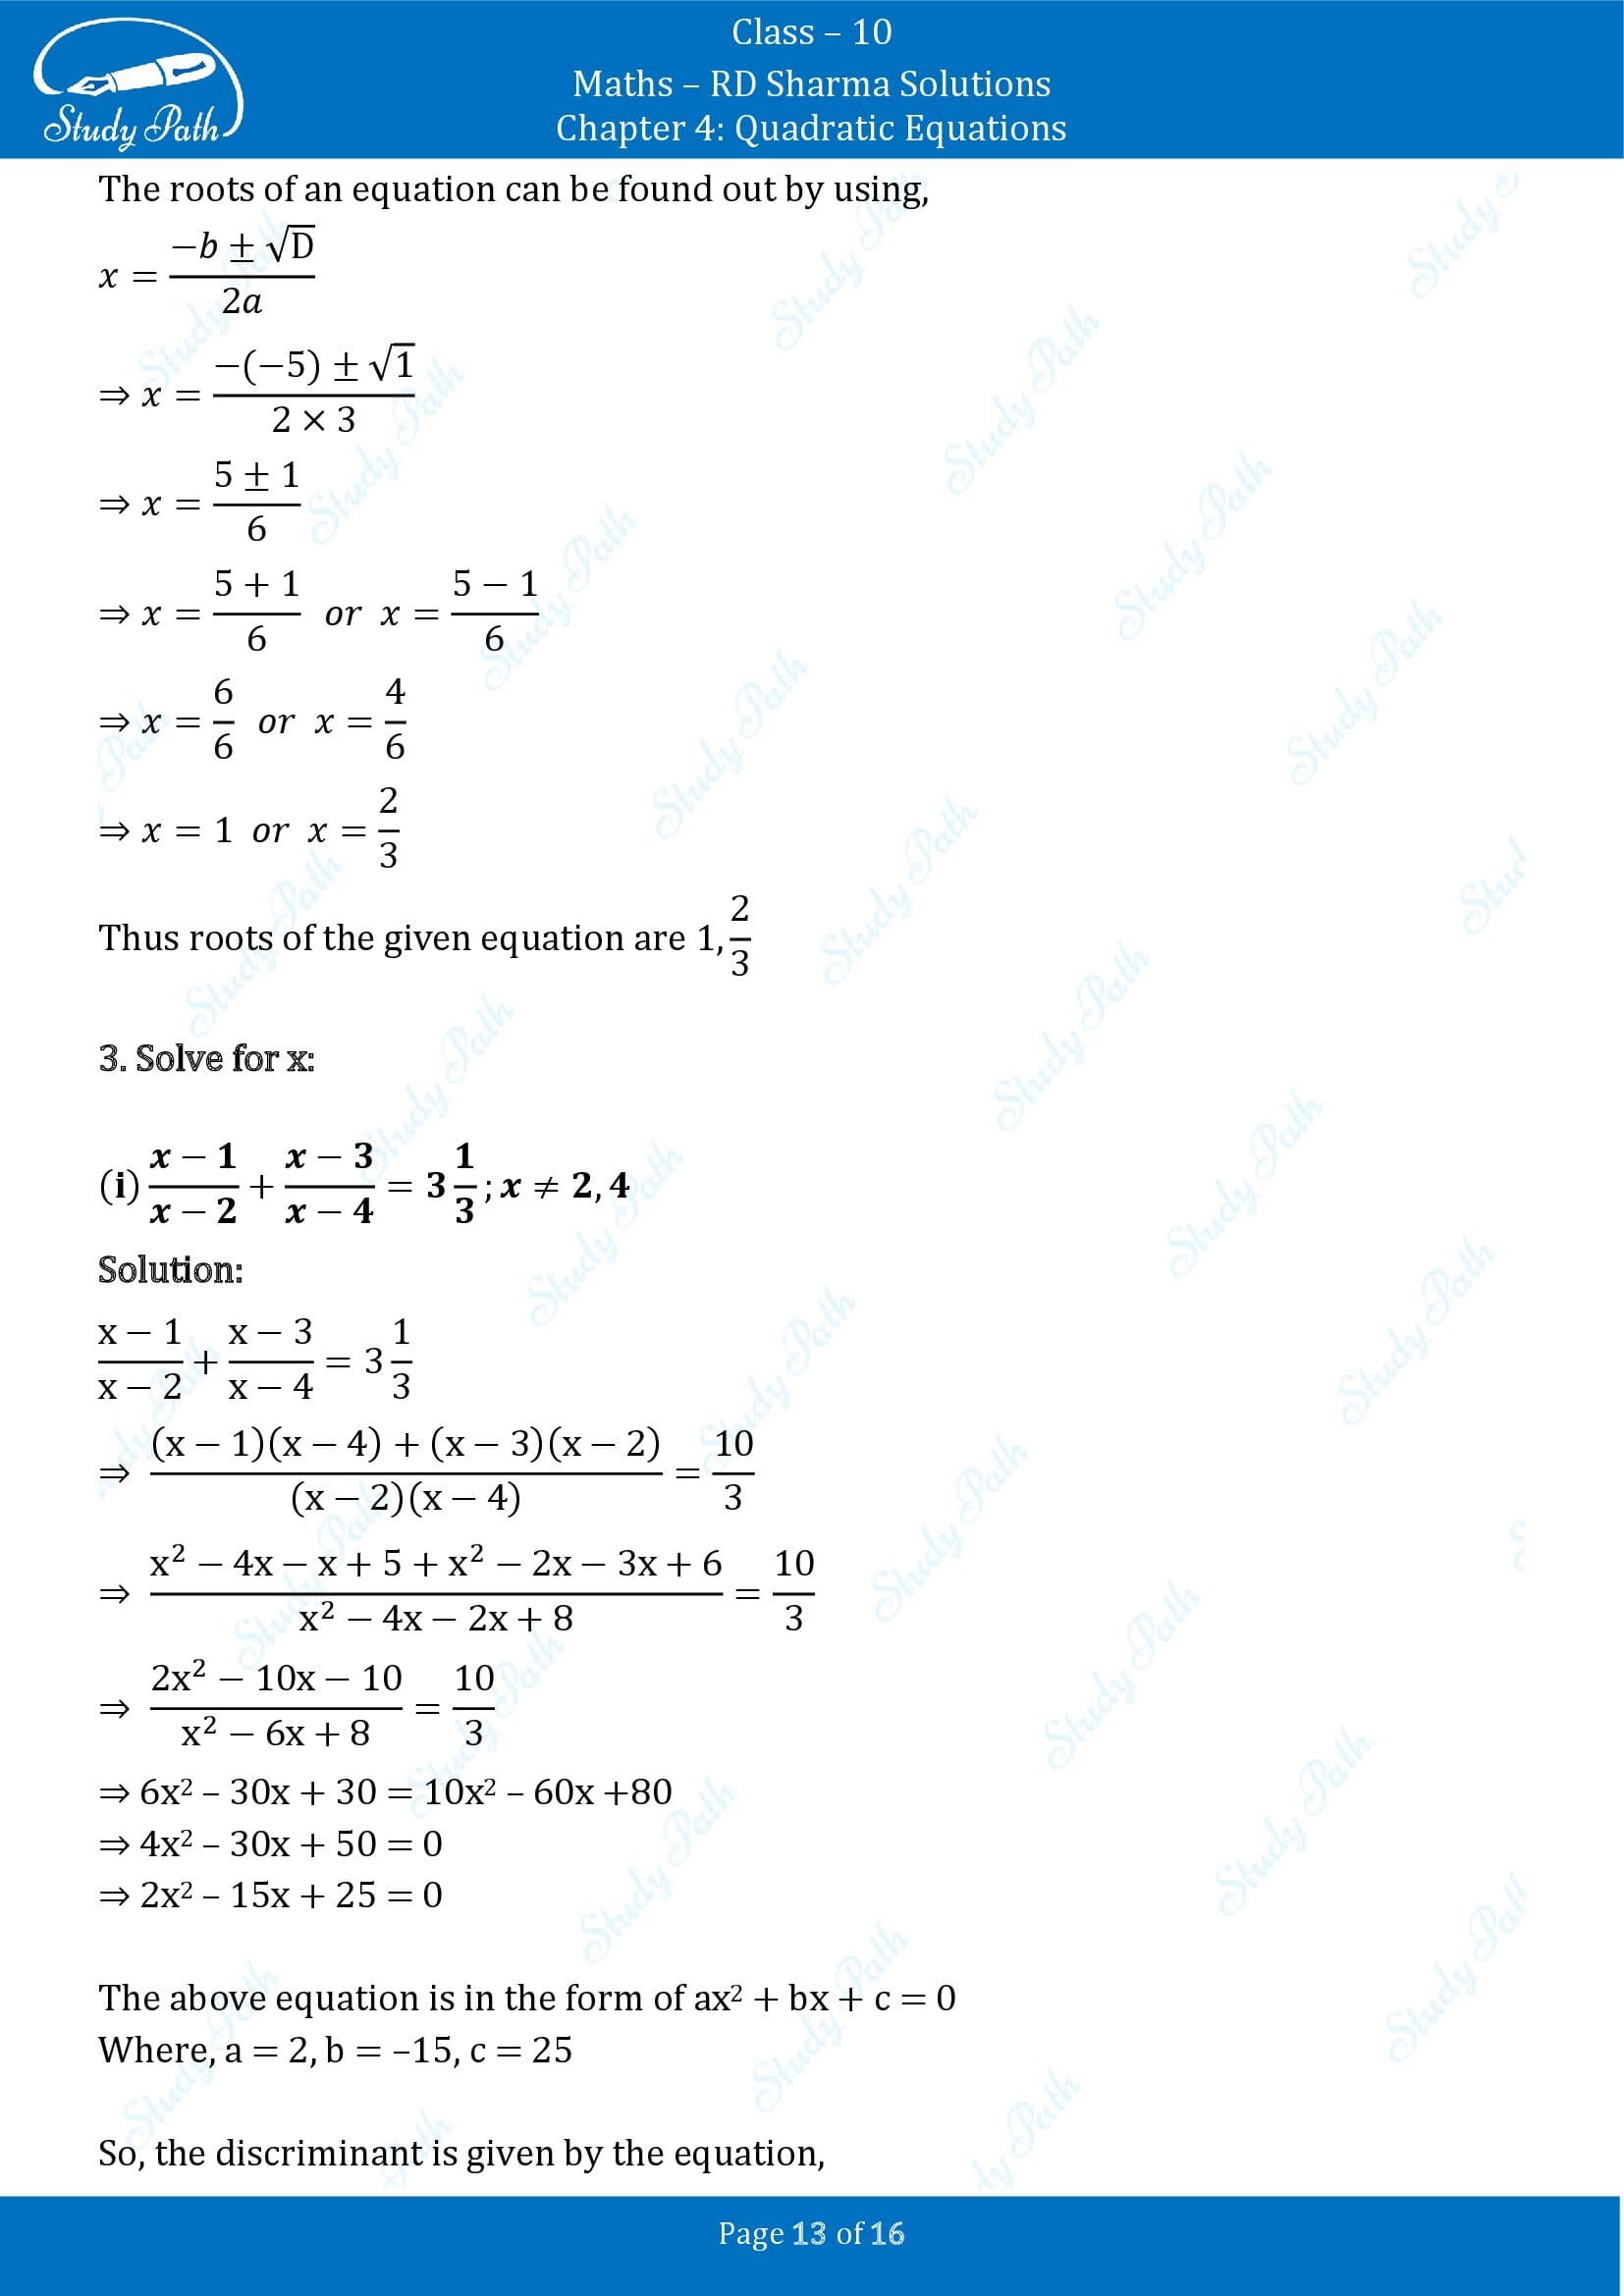 RD Sharma Solutions Class 10 Chapter 4 Quadratic Equations Exercise 4.5 00013